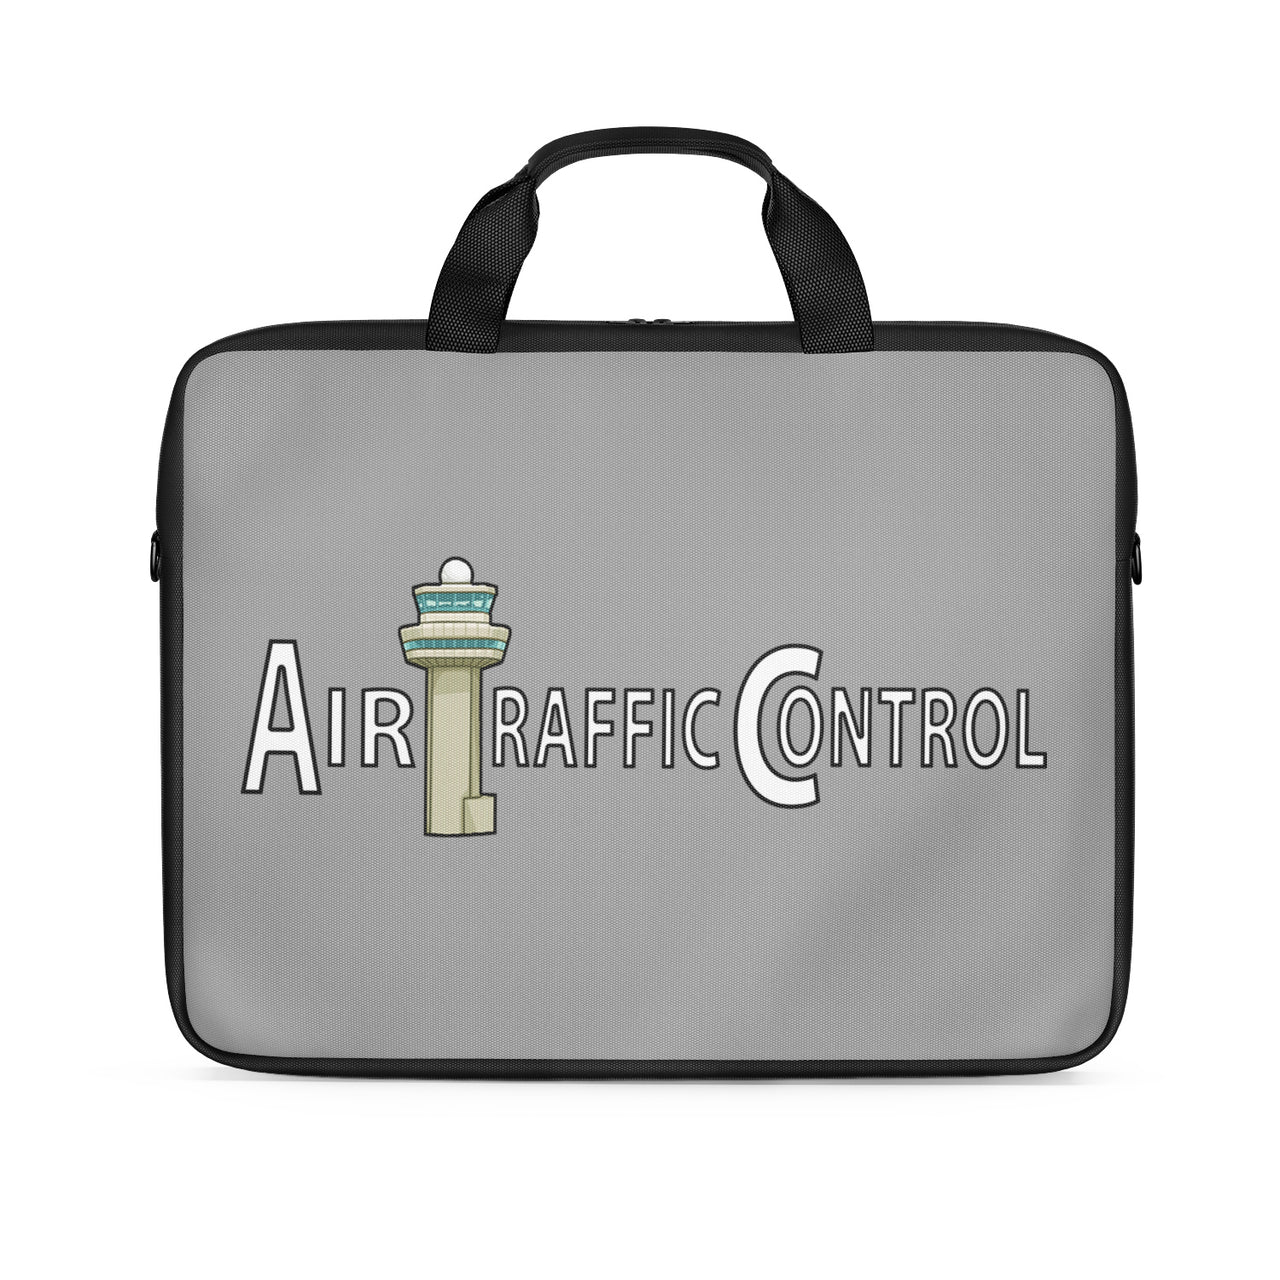 Air Traffic Control Designed Laptop & Tablet Bags